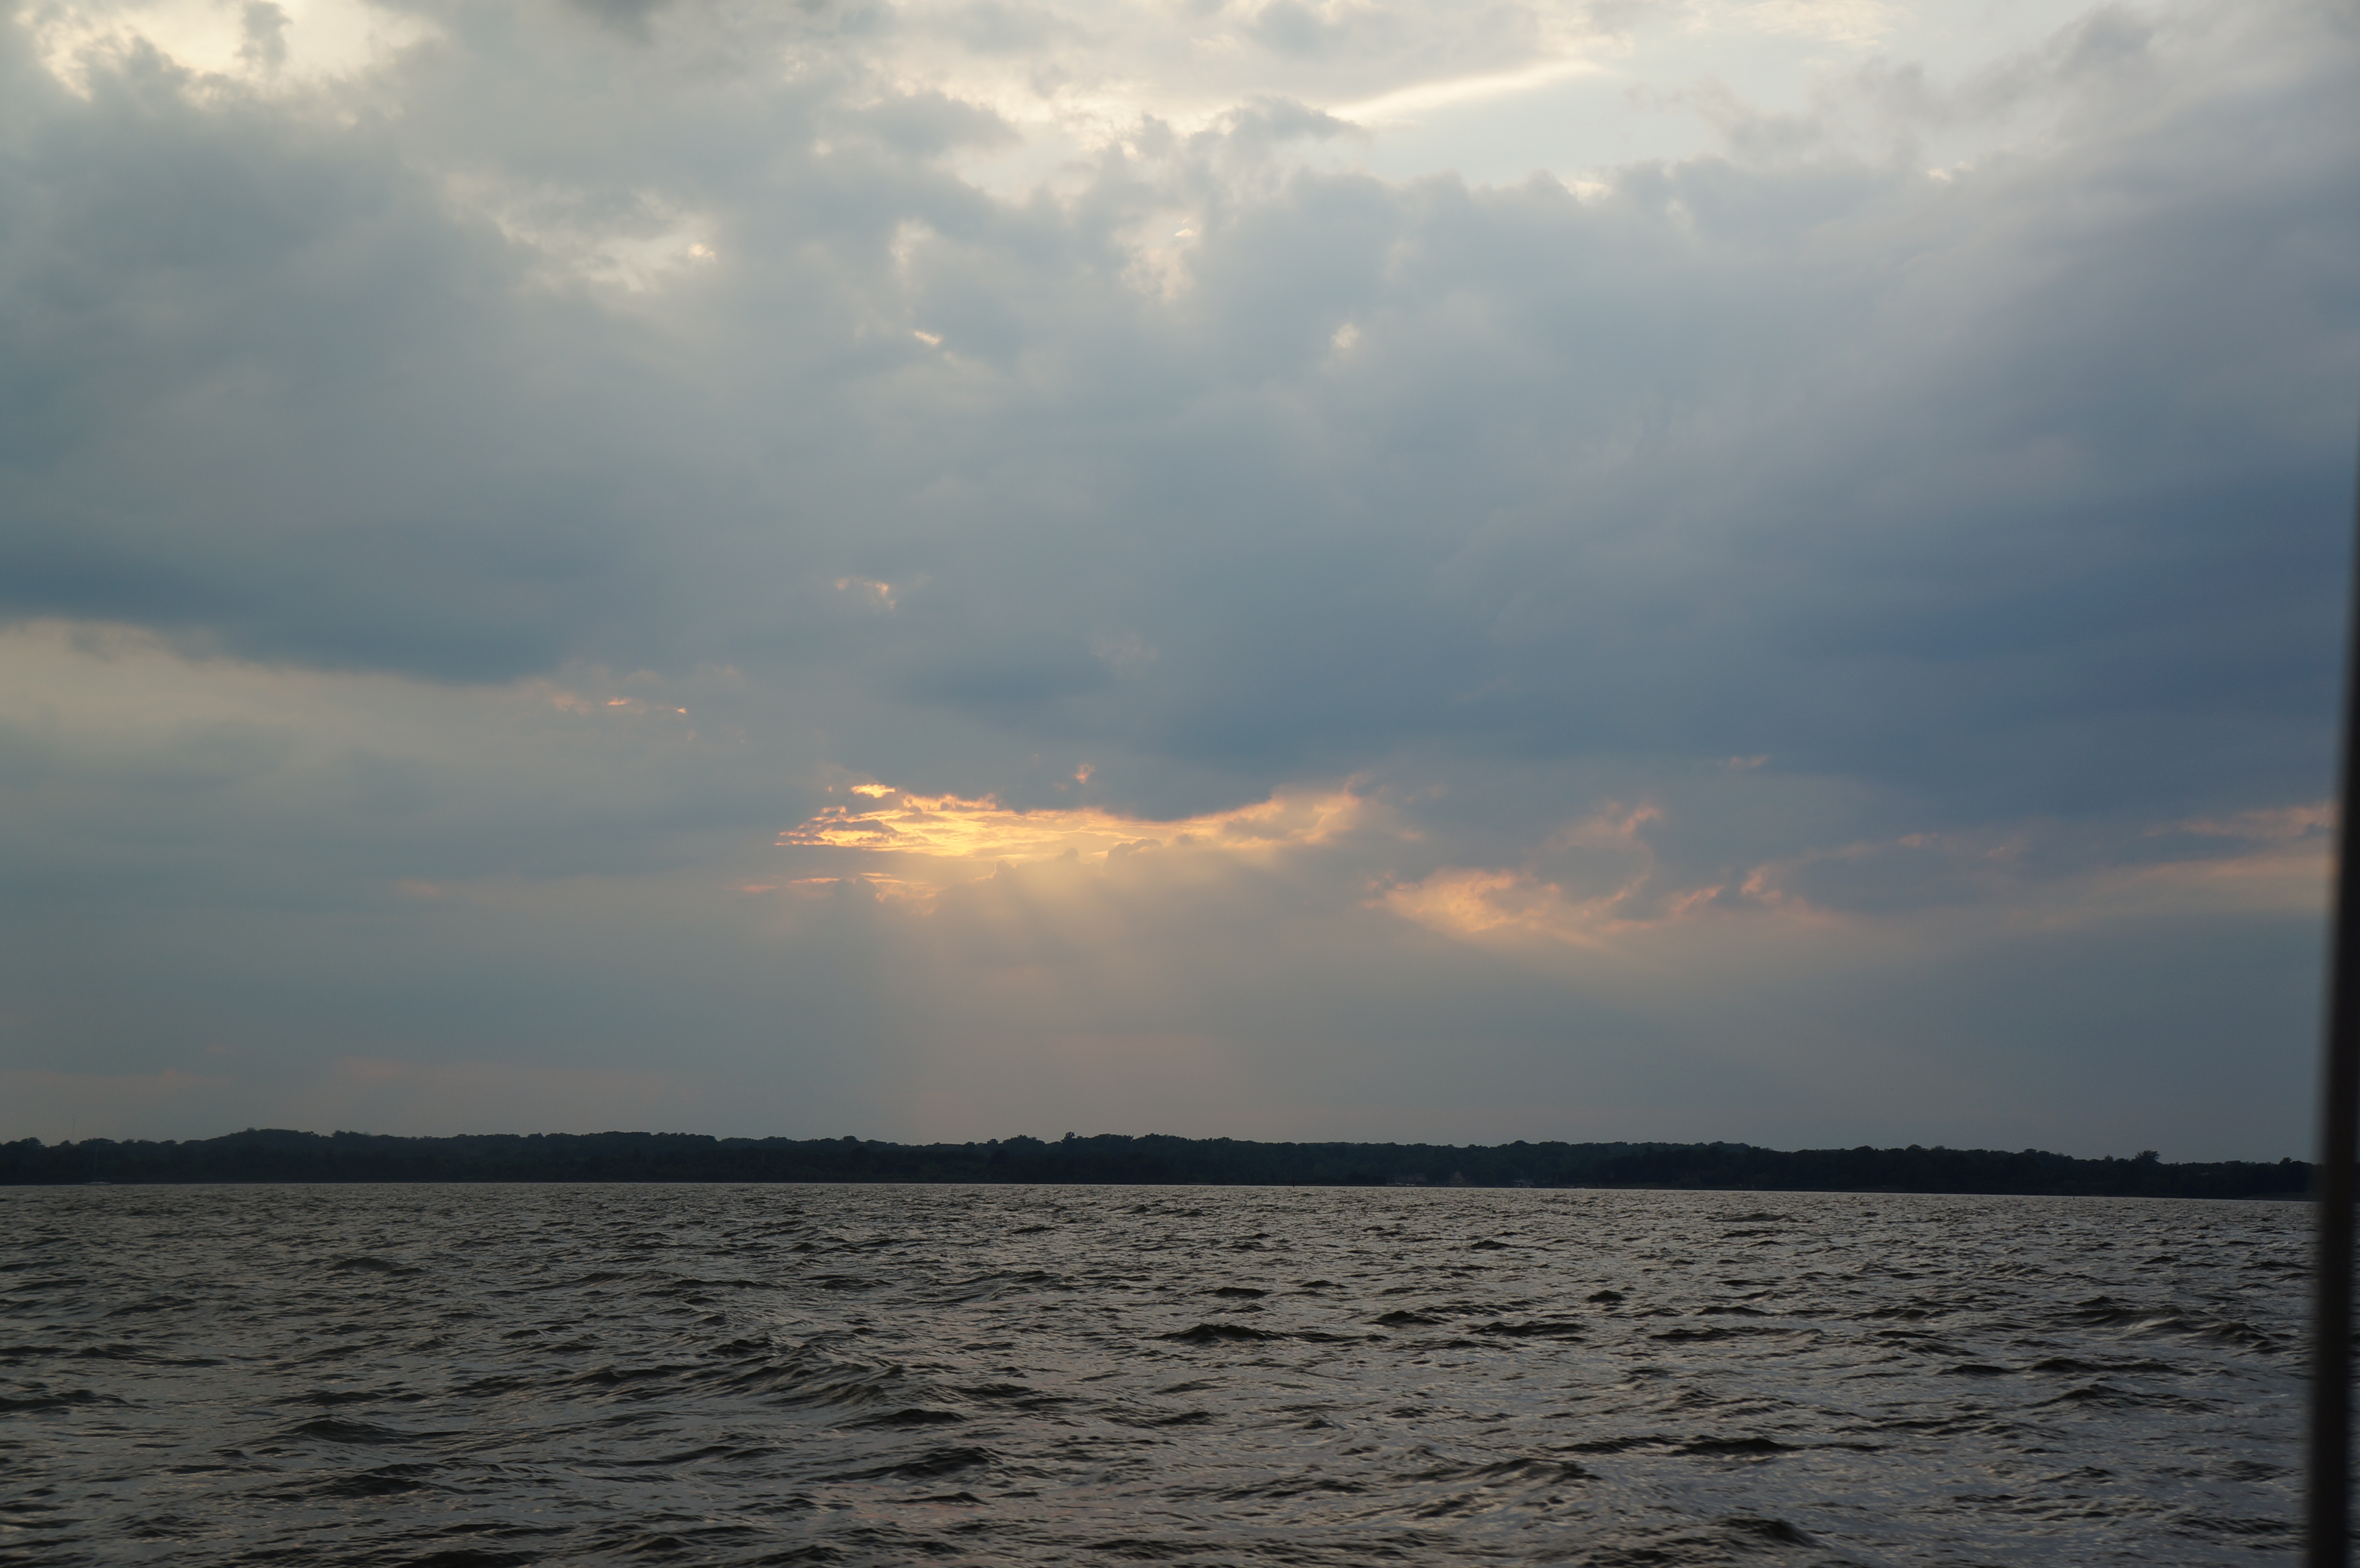 Rays of sun peaking through clouds over the water